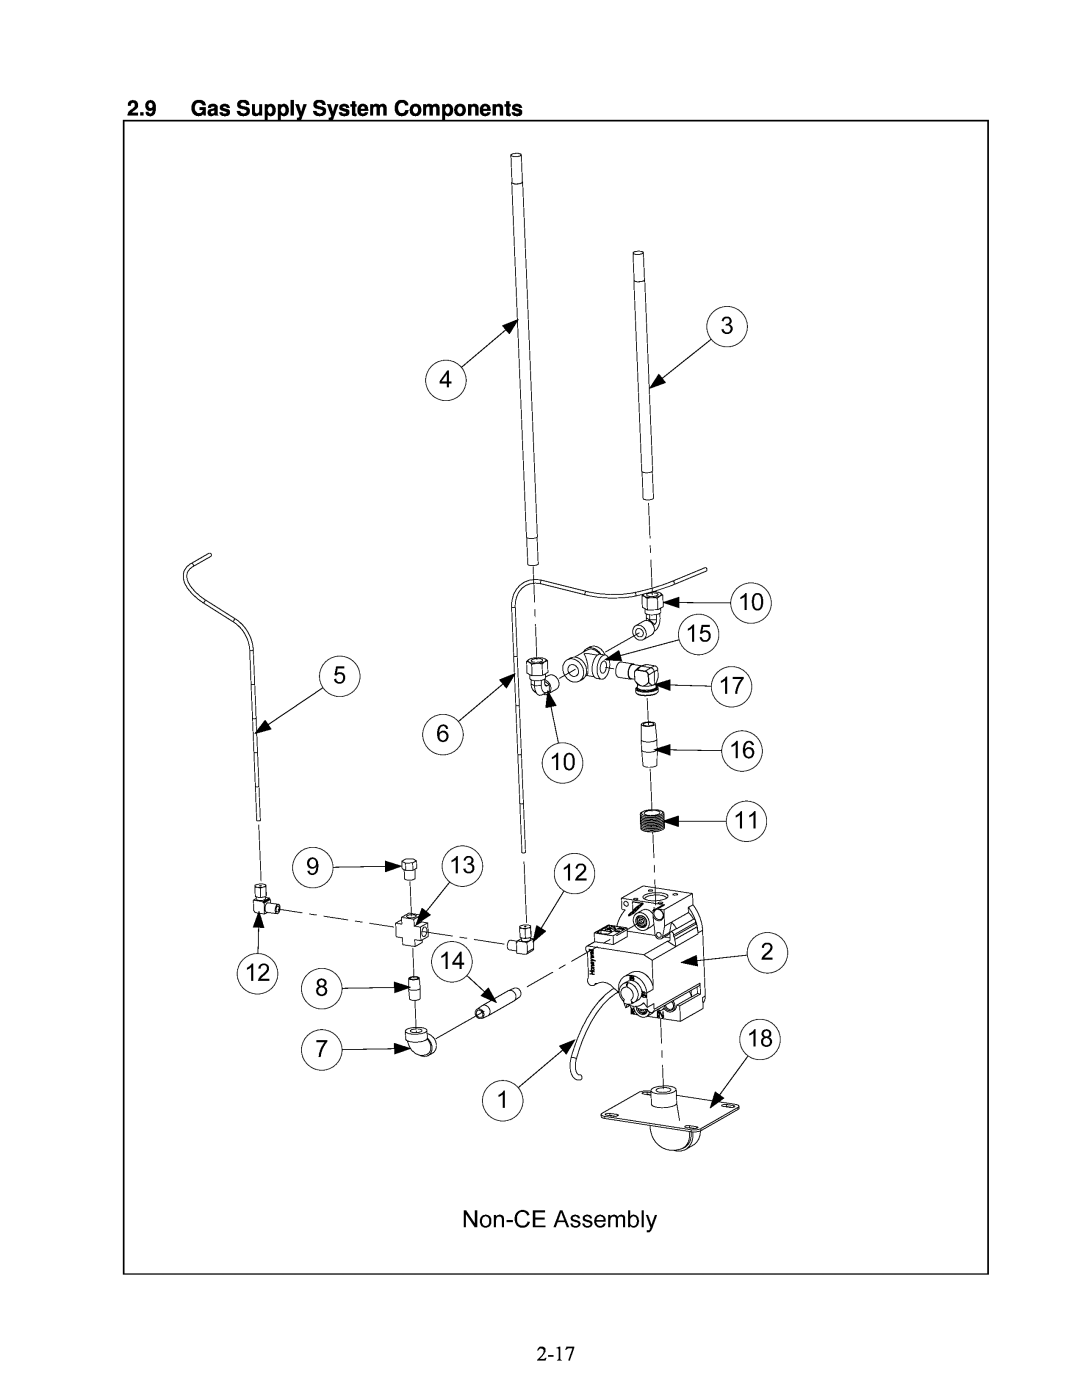 Frymaster 8196692 manual 2.9Gas Supply System Components 